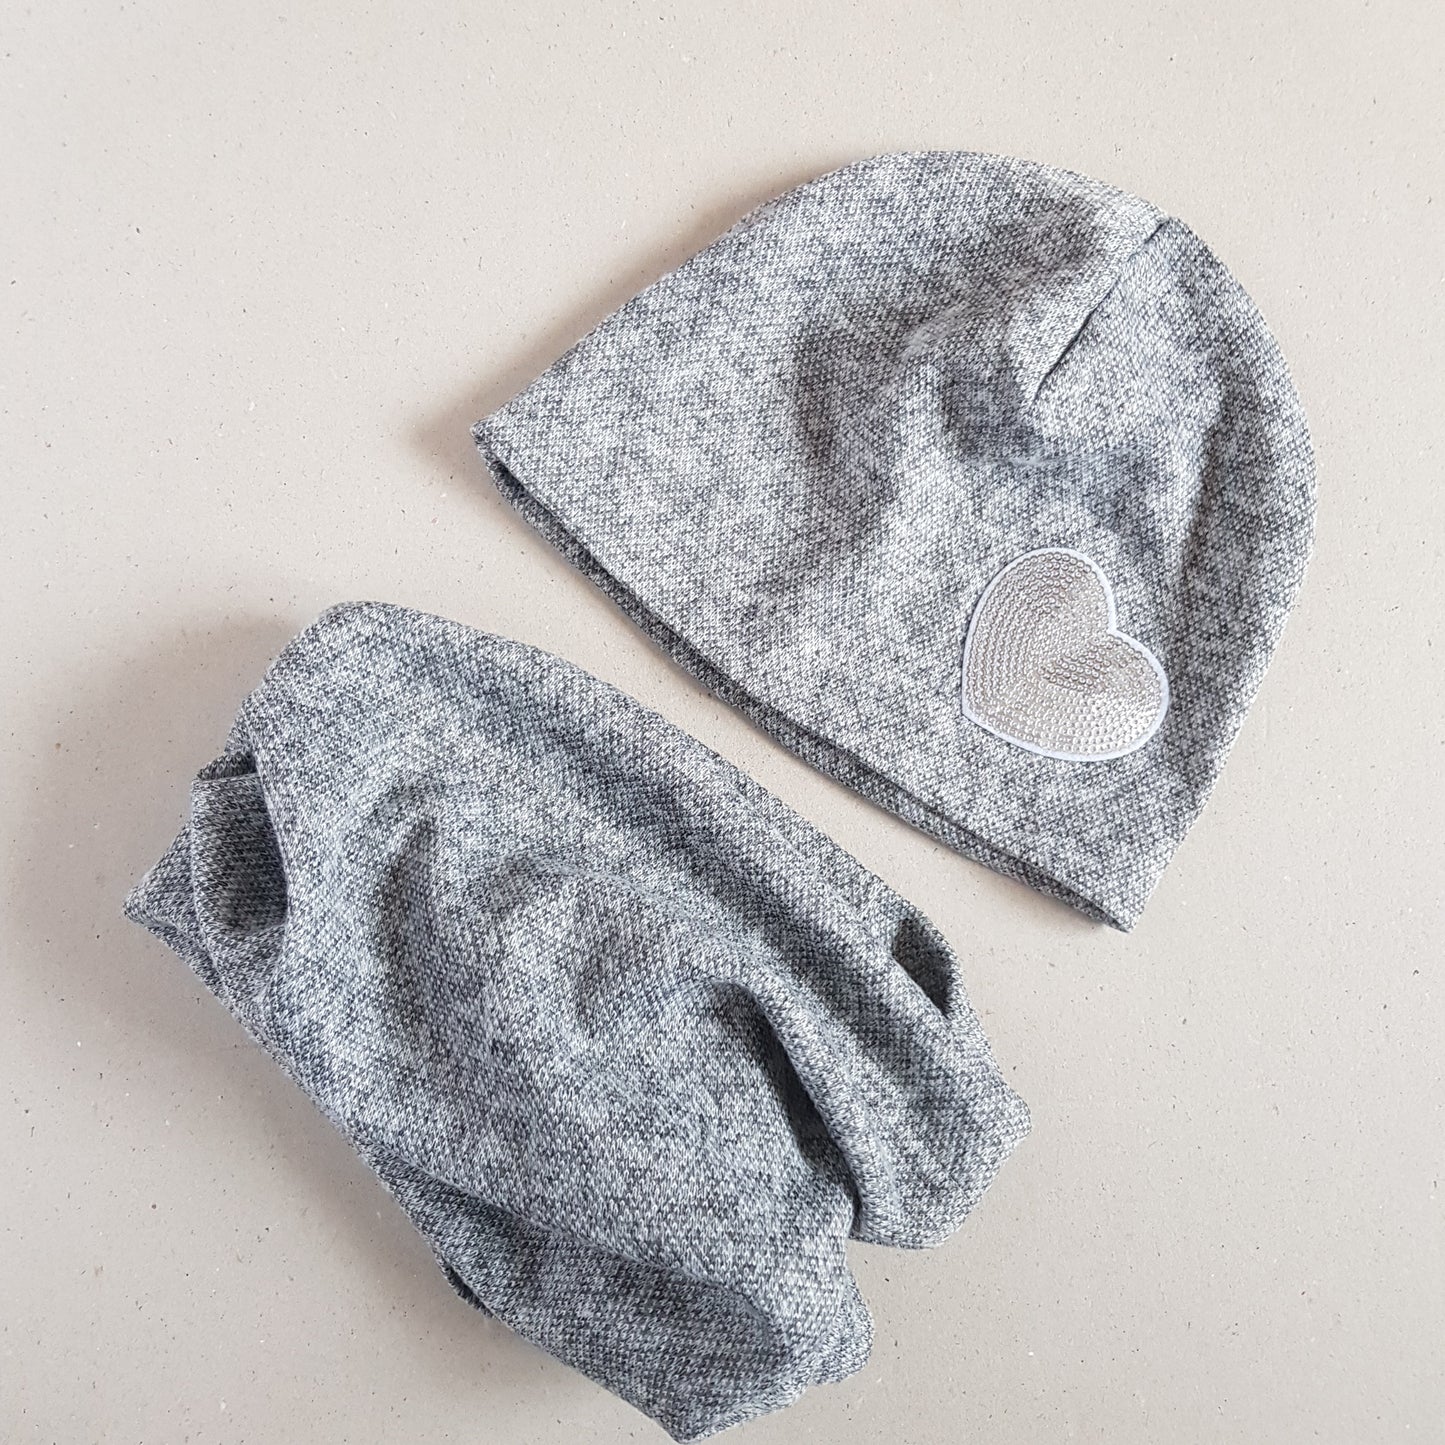 Girls hat beanie and snood set